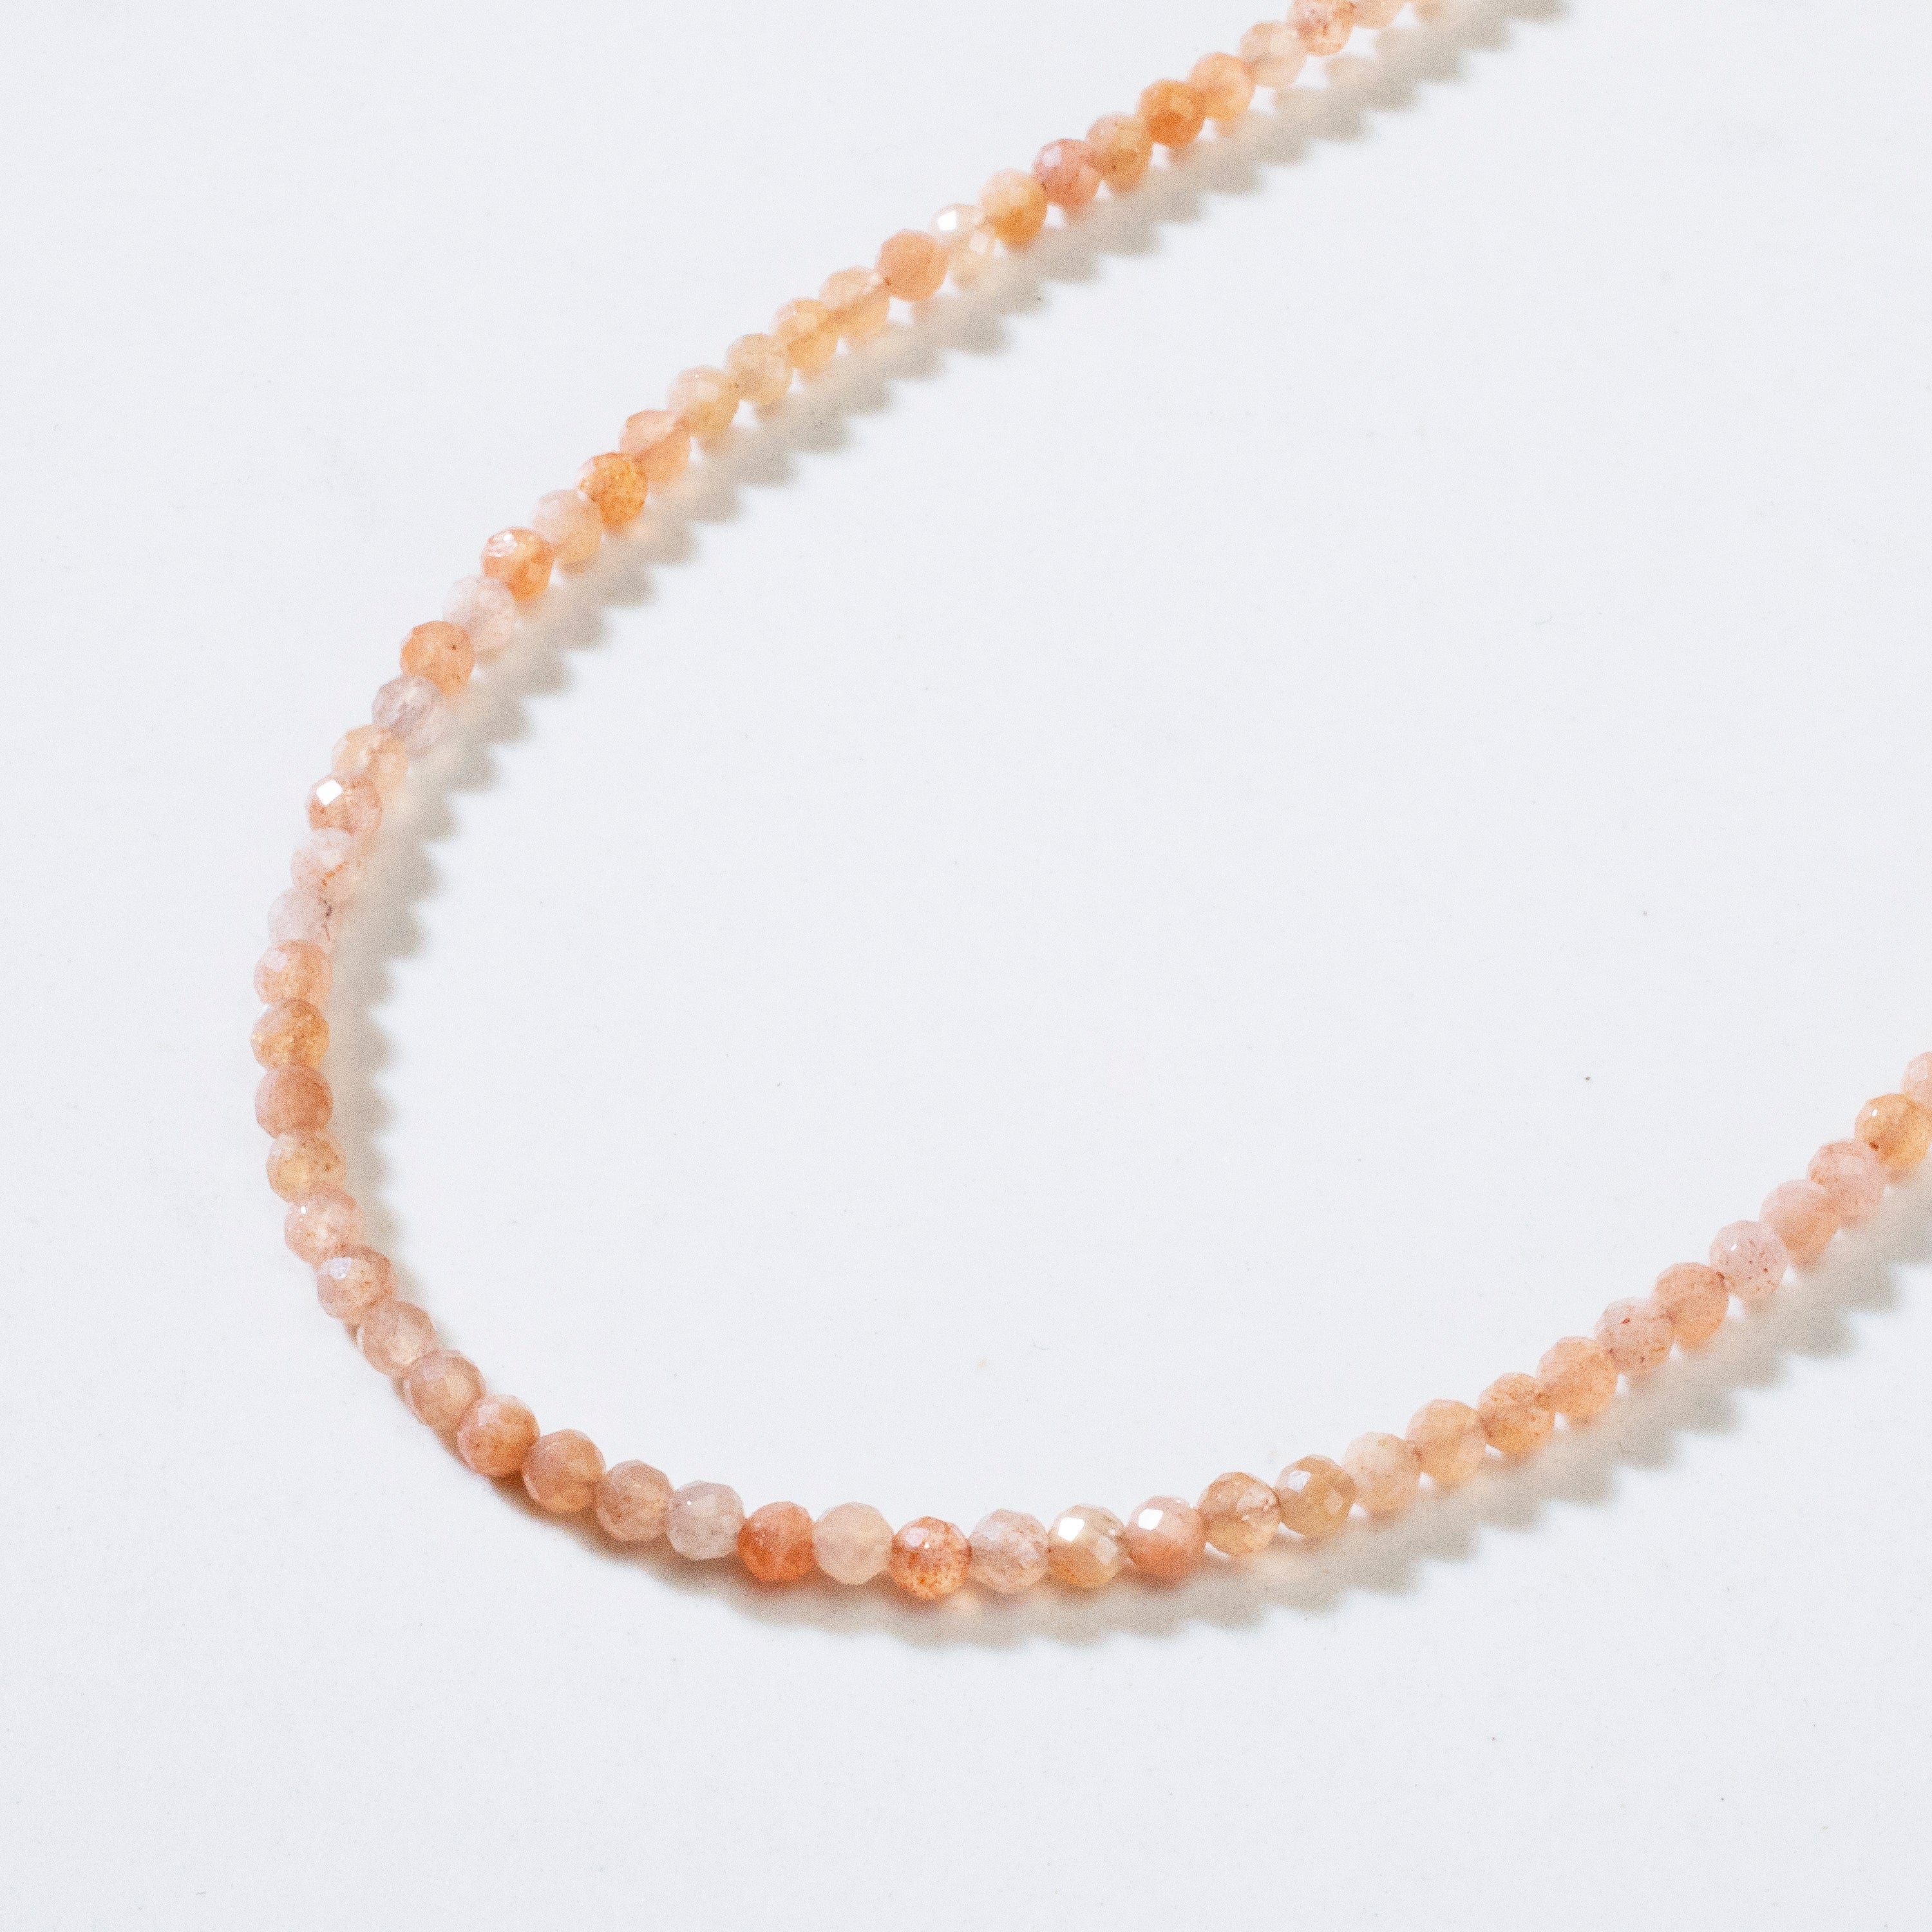 KALIFANO Gemstone Jewelry 3mm Peach Moonstone Faceted 31" Necklace / Multi Wrap Bracelet N3-79G-PM